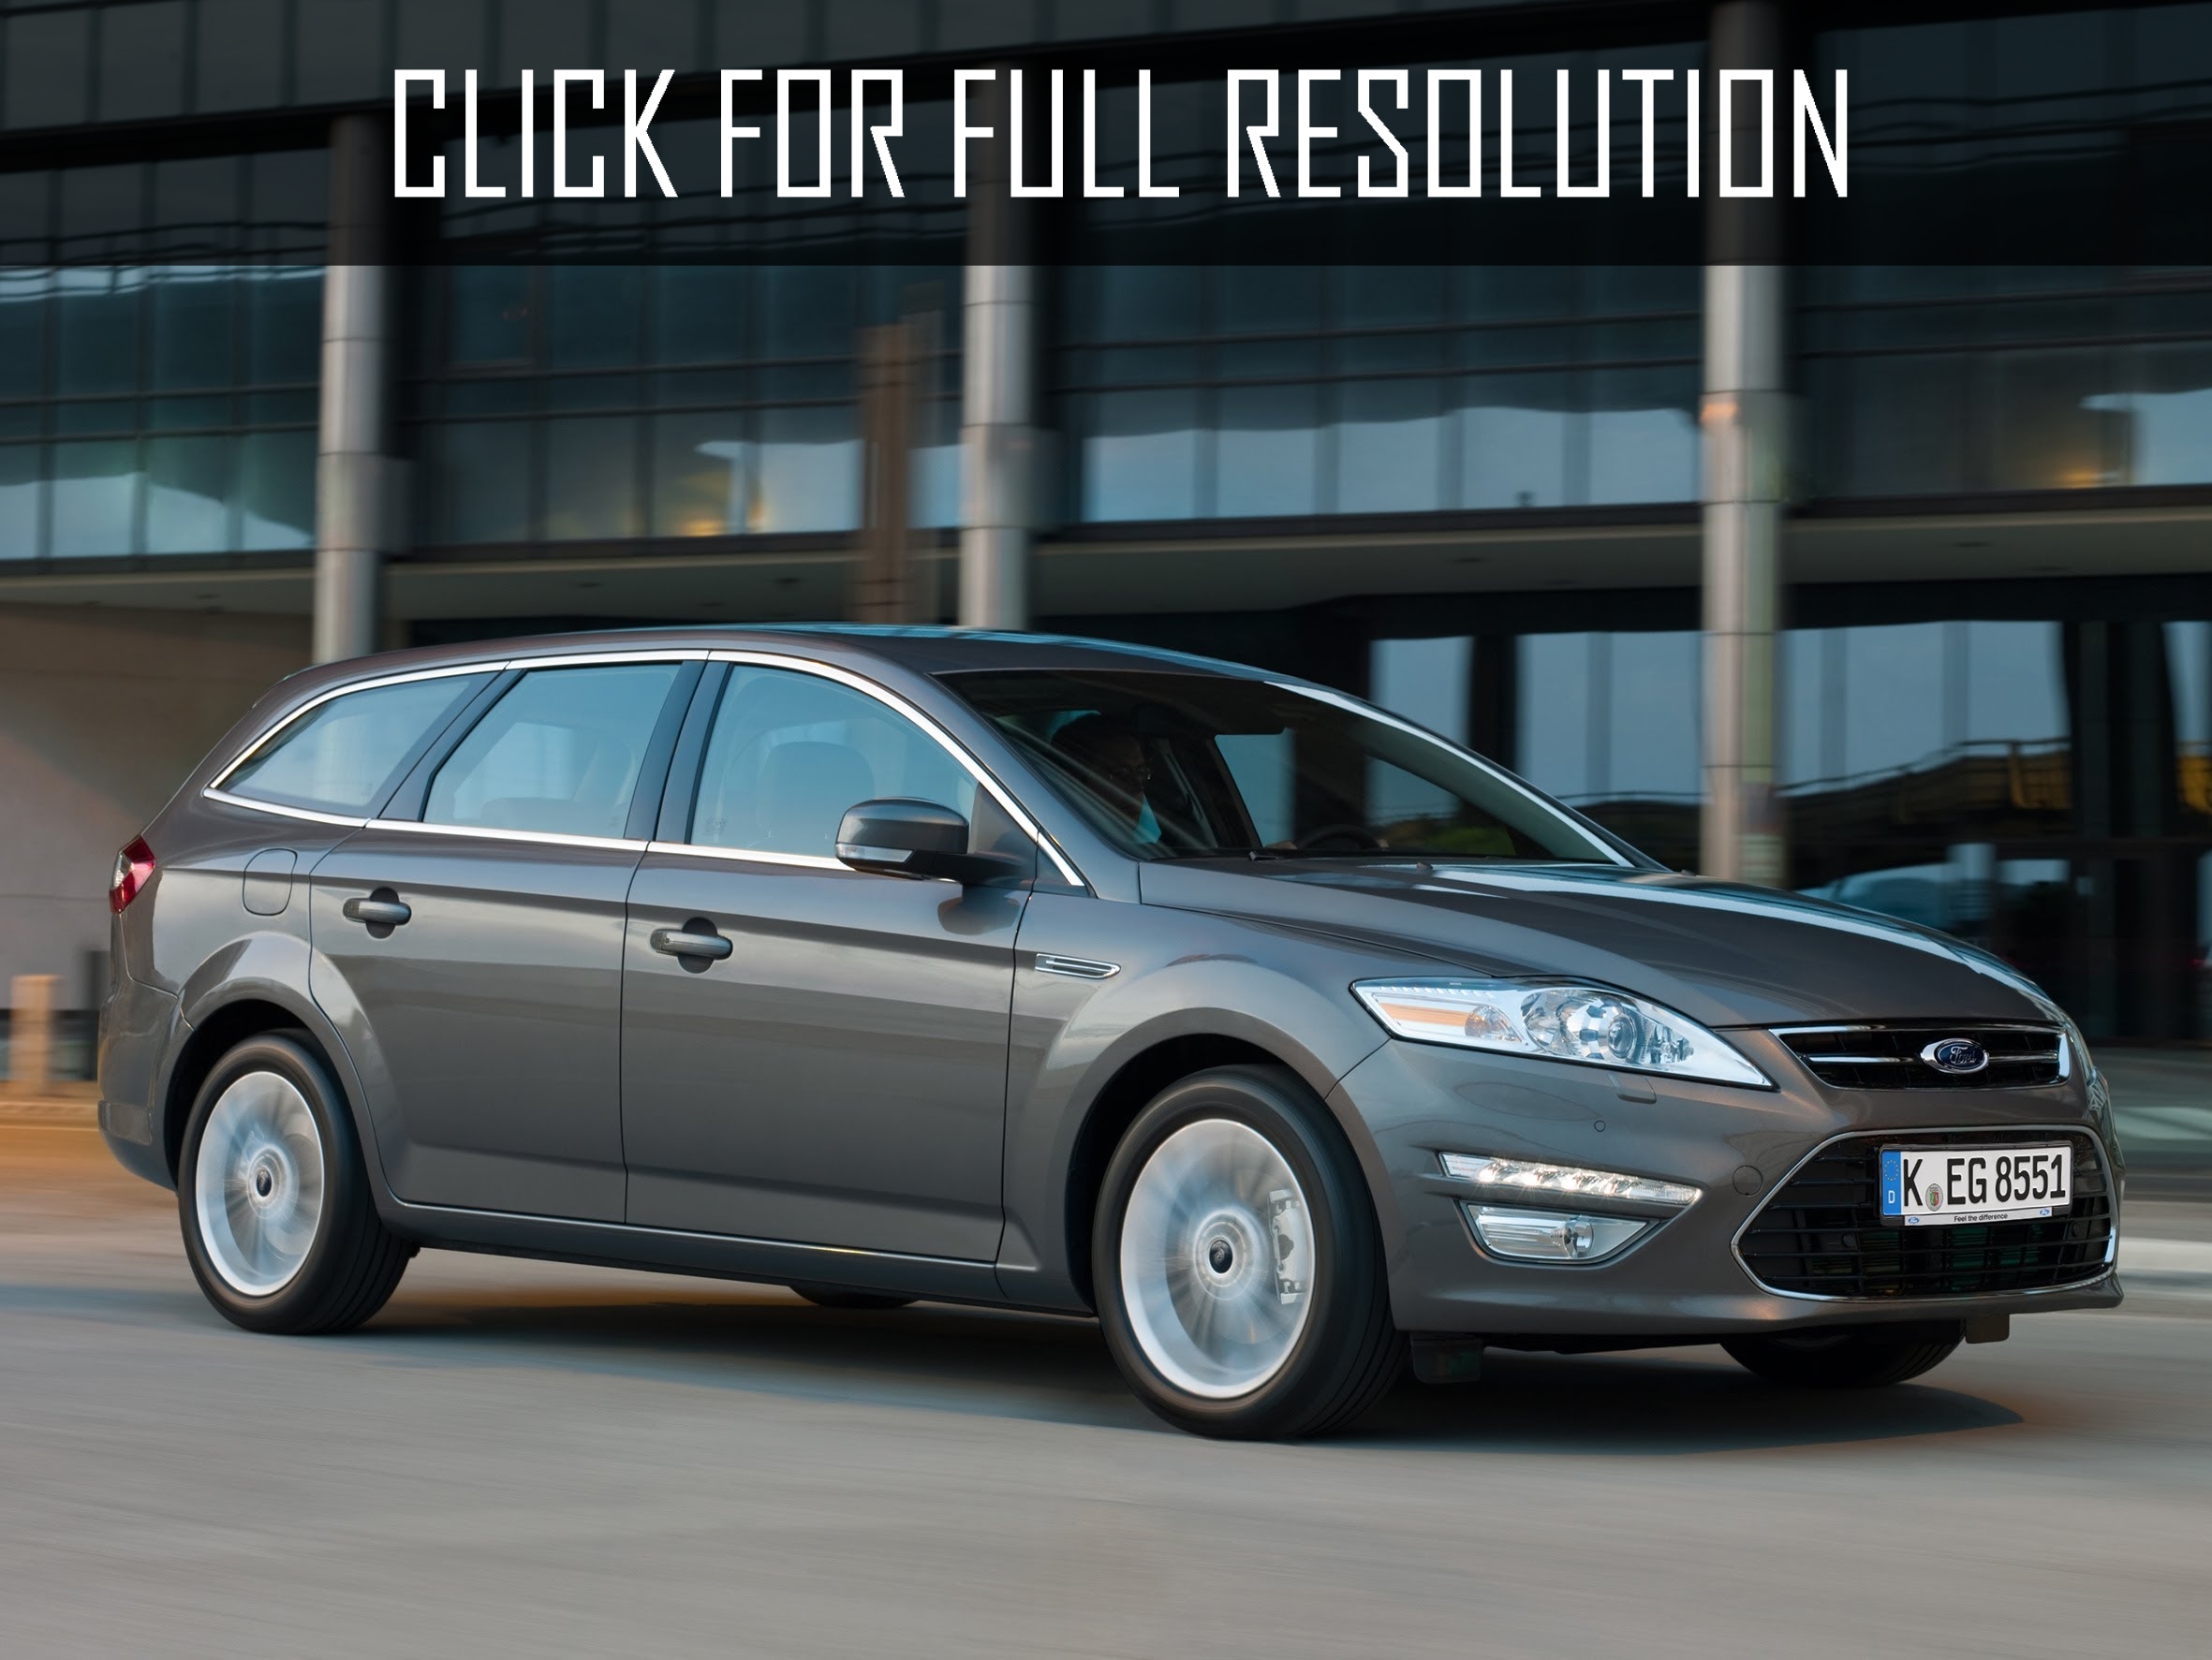 Ford Mondeo Kombi 2012 amazing photo gallery, some